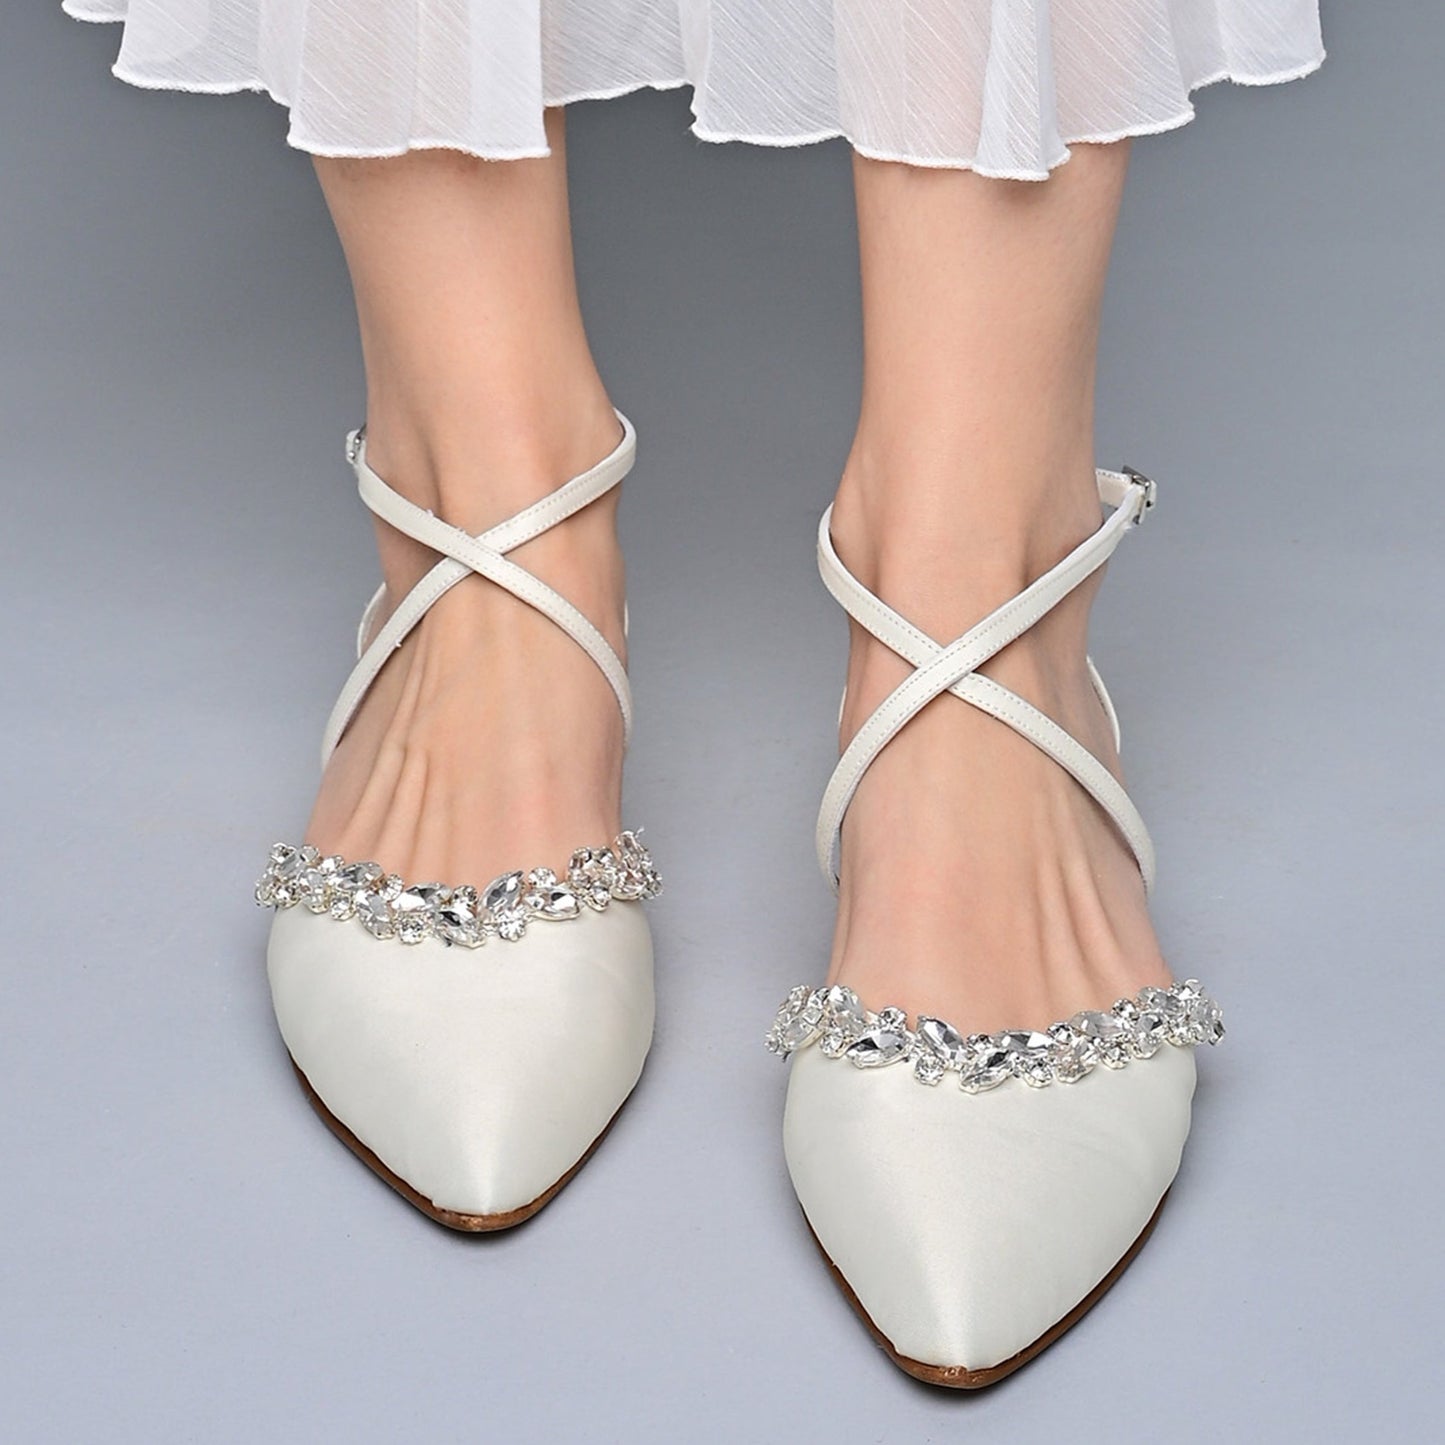 Ivory shimmering glitter satin lace overlay low heel shoes | Wedding Shoes,  Occasion Shoes amp; San